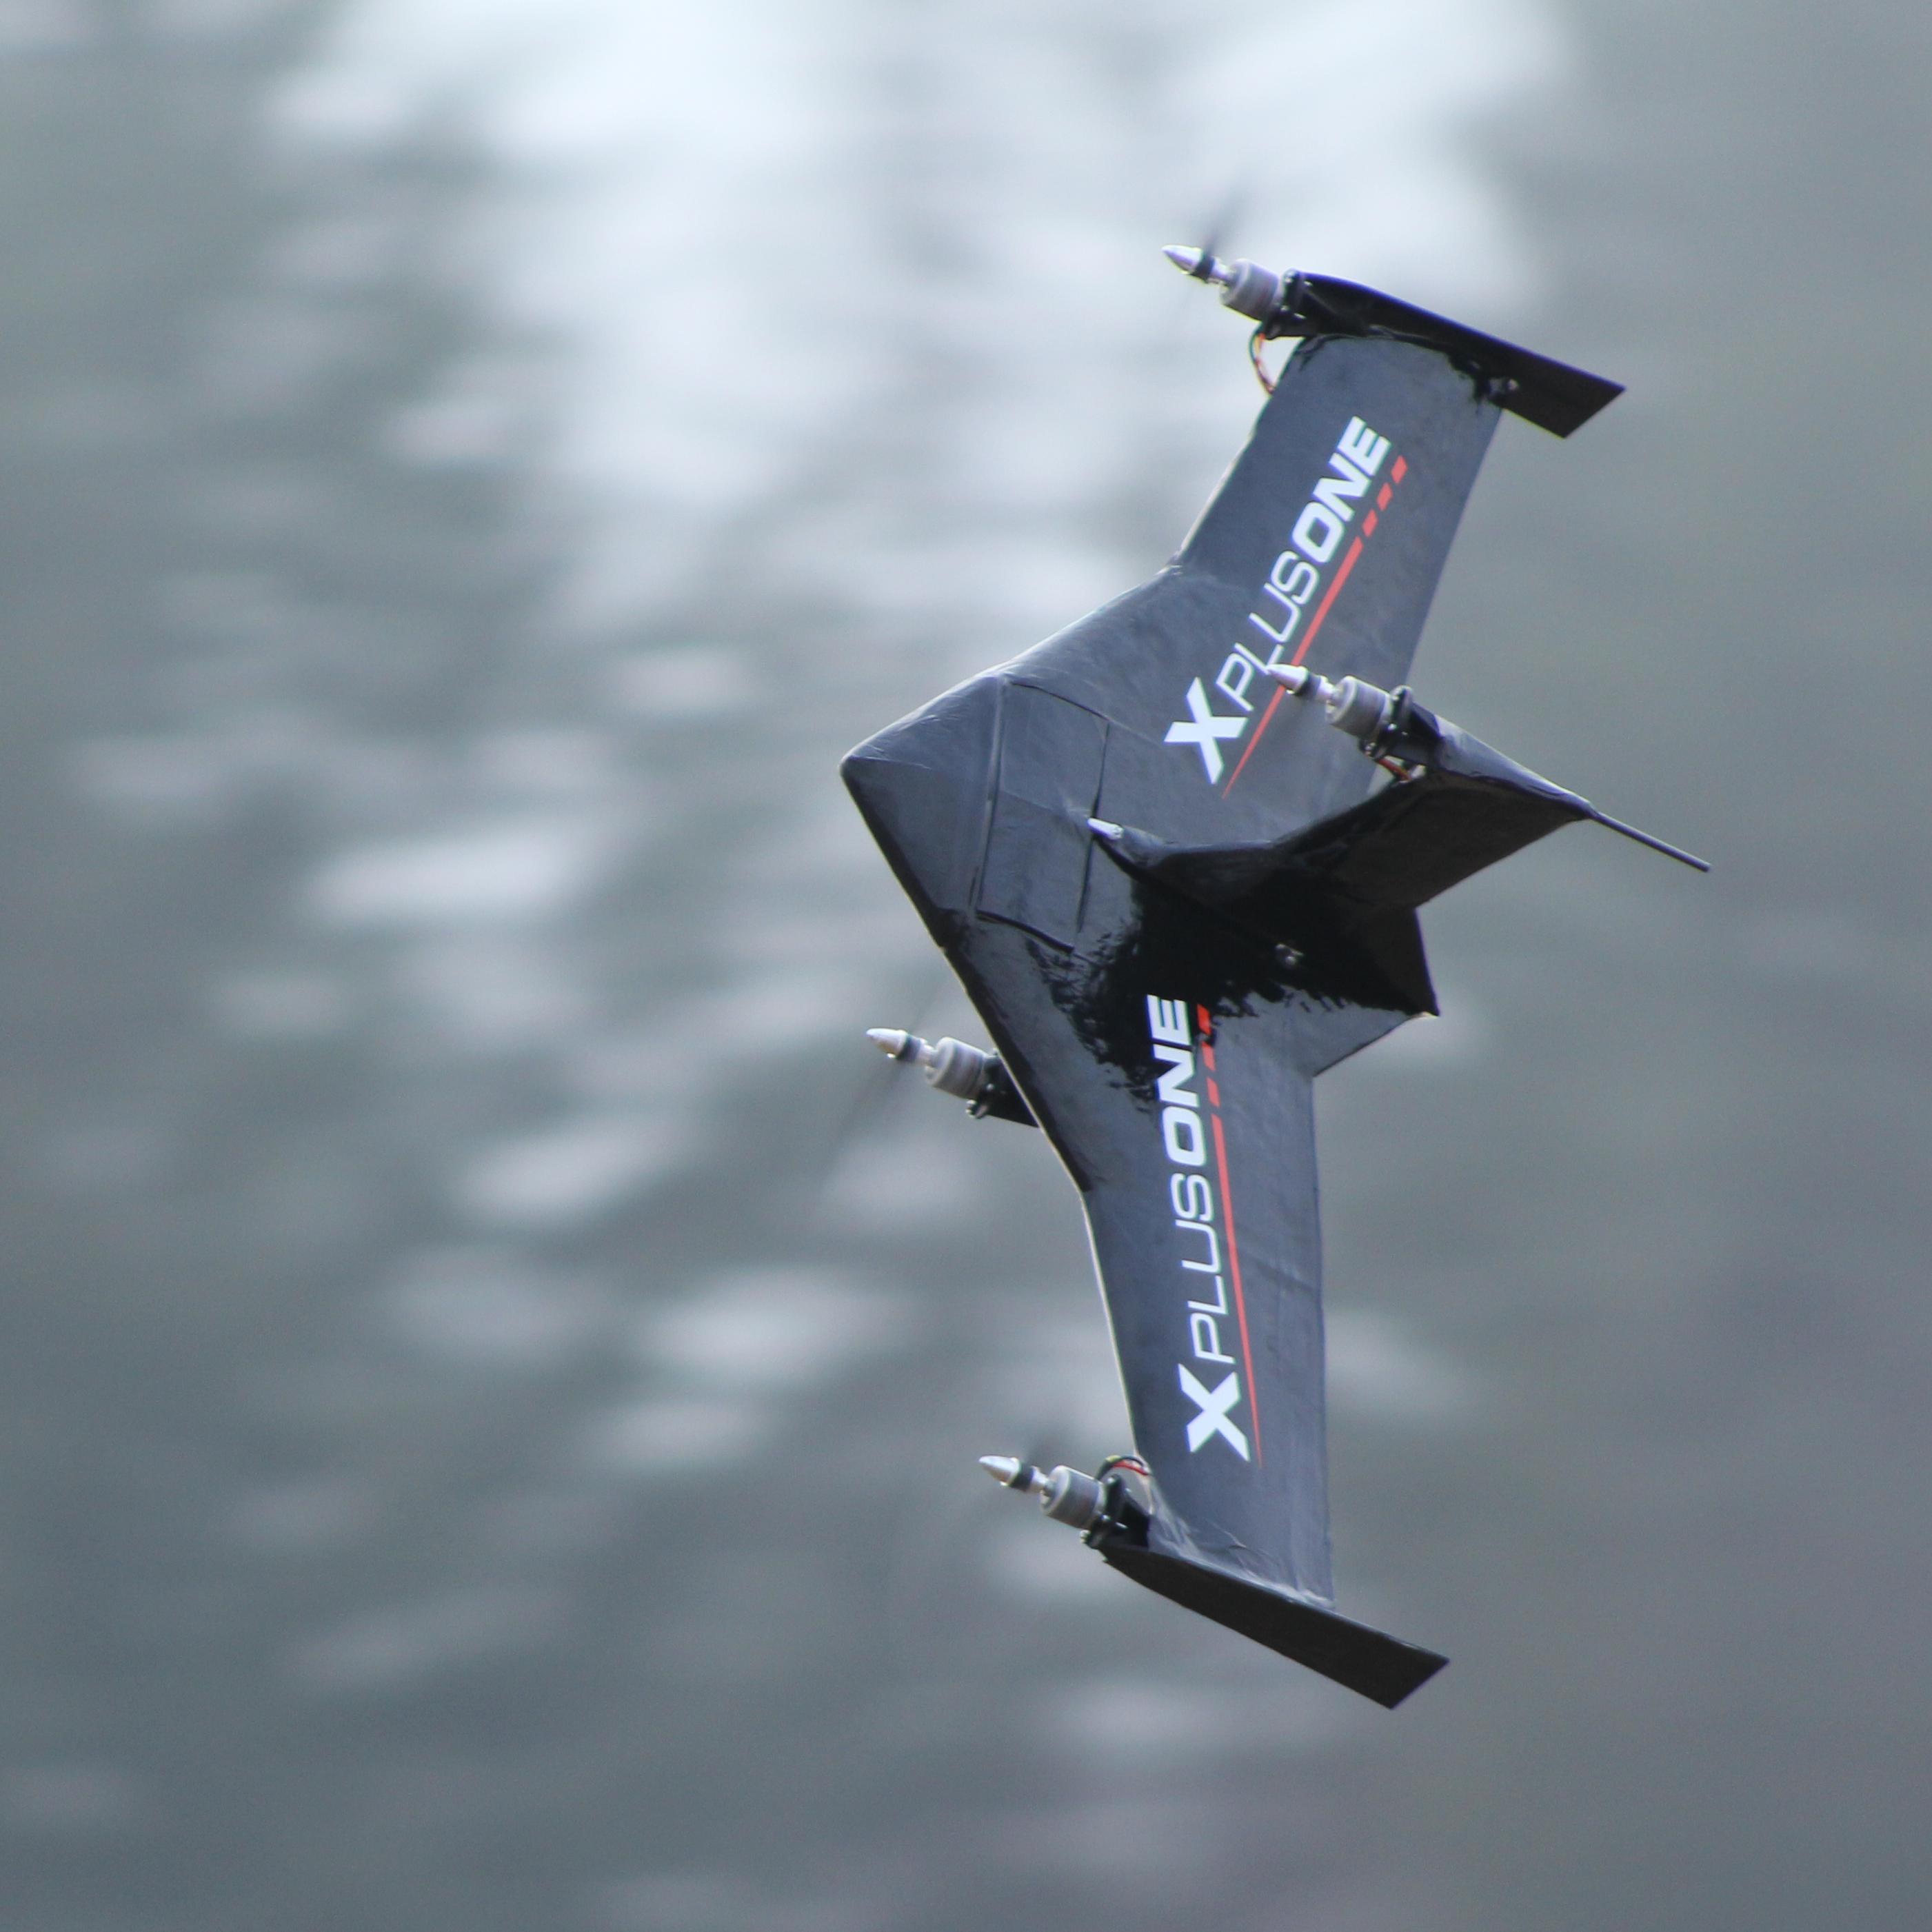 A revolutionary hybrid drone that combines the ability for
both stabilized hover and remarkably fast forward flight.